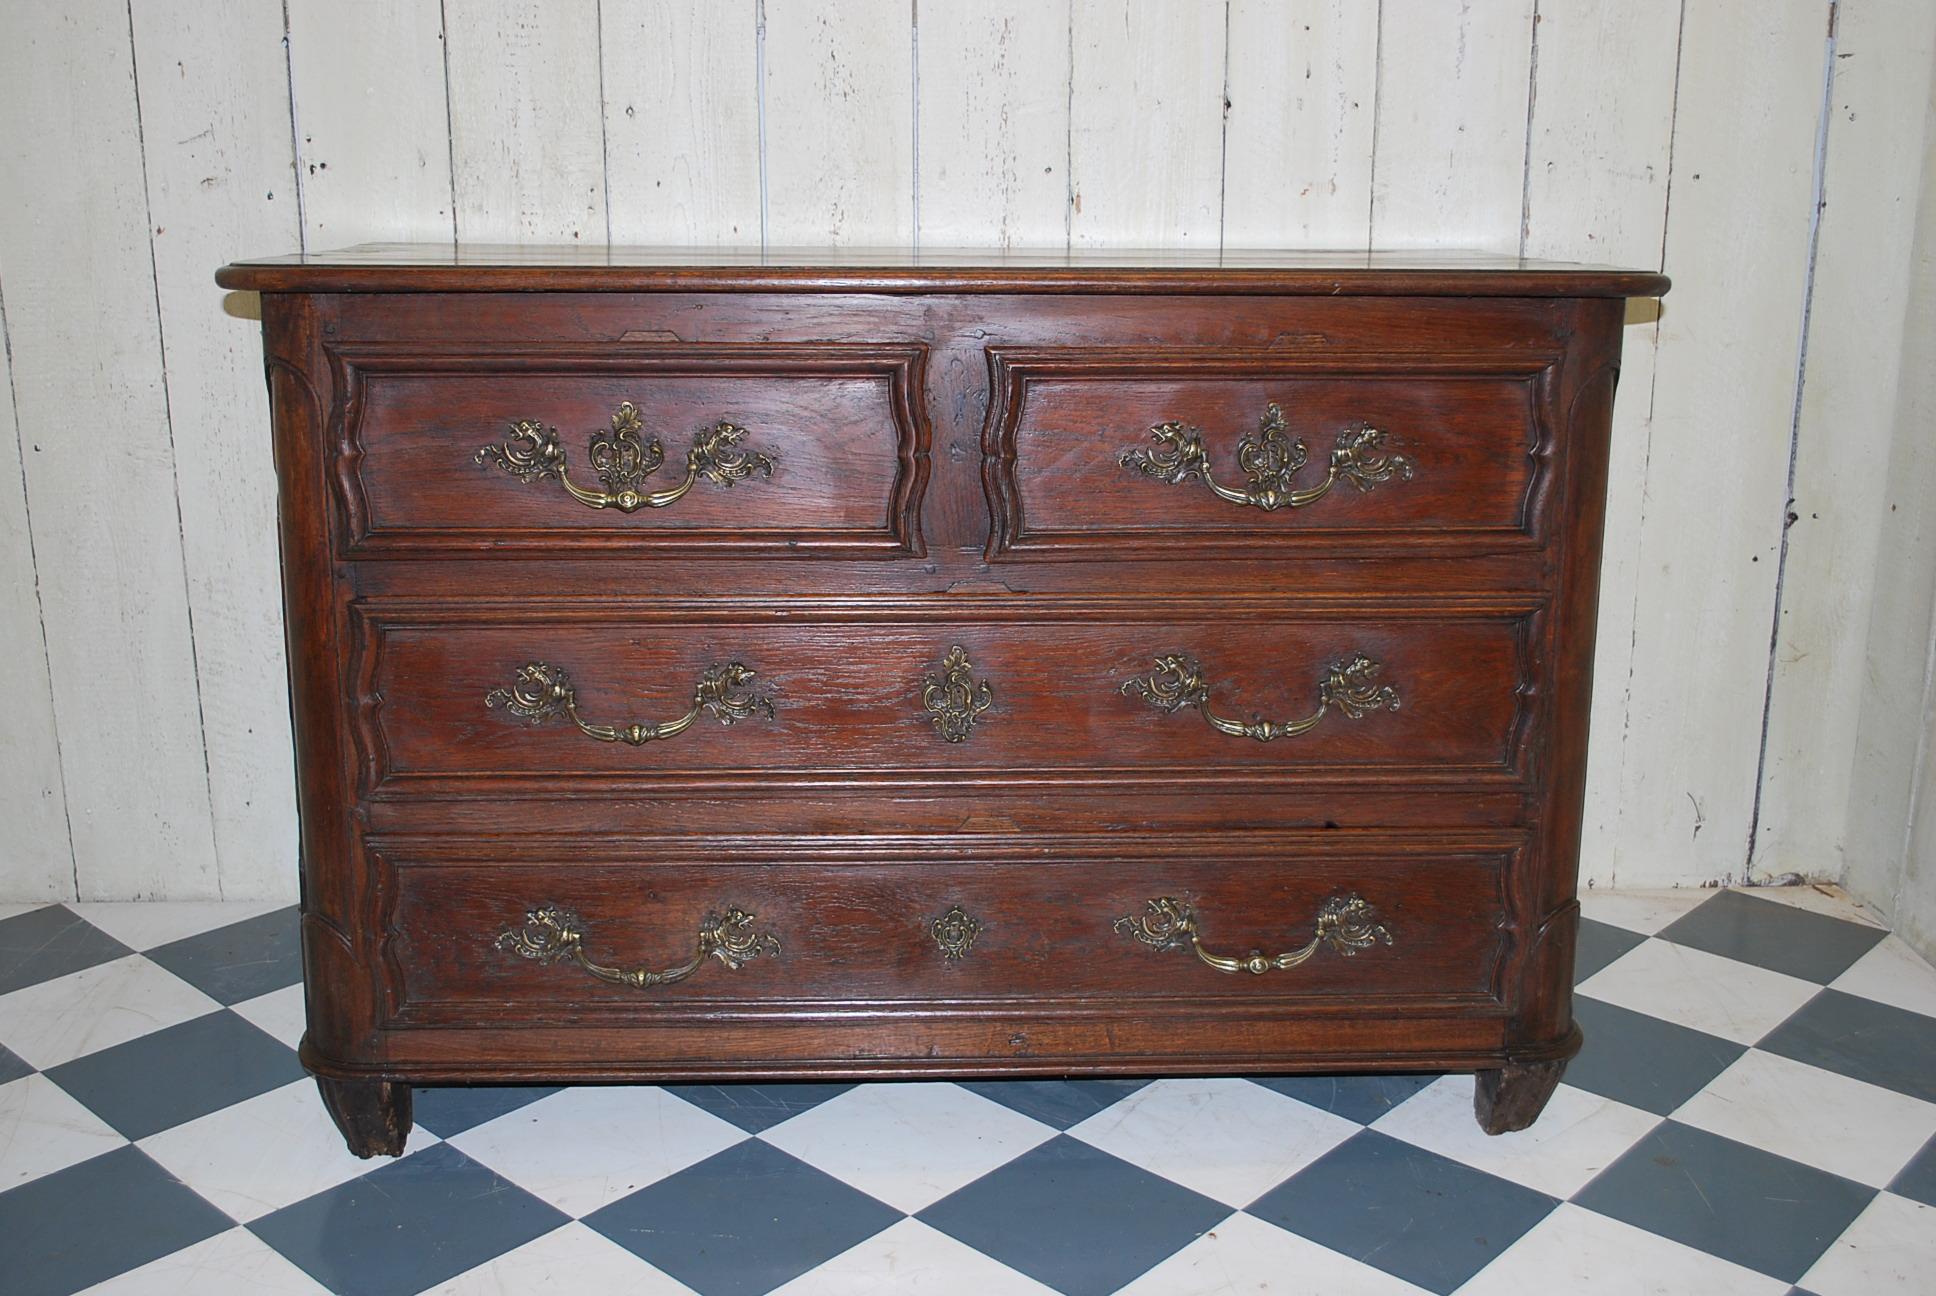 A substantial French 18th century oak commode / chest of drawers, circa 1780. Made in solid oak with original pine drawer linings, standing on original feet. Lovely quality original cast brass rococo handles and escutcheon plates. Superb colour and